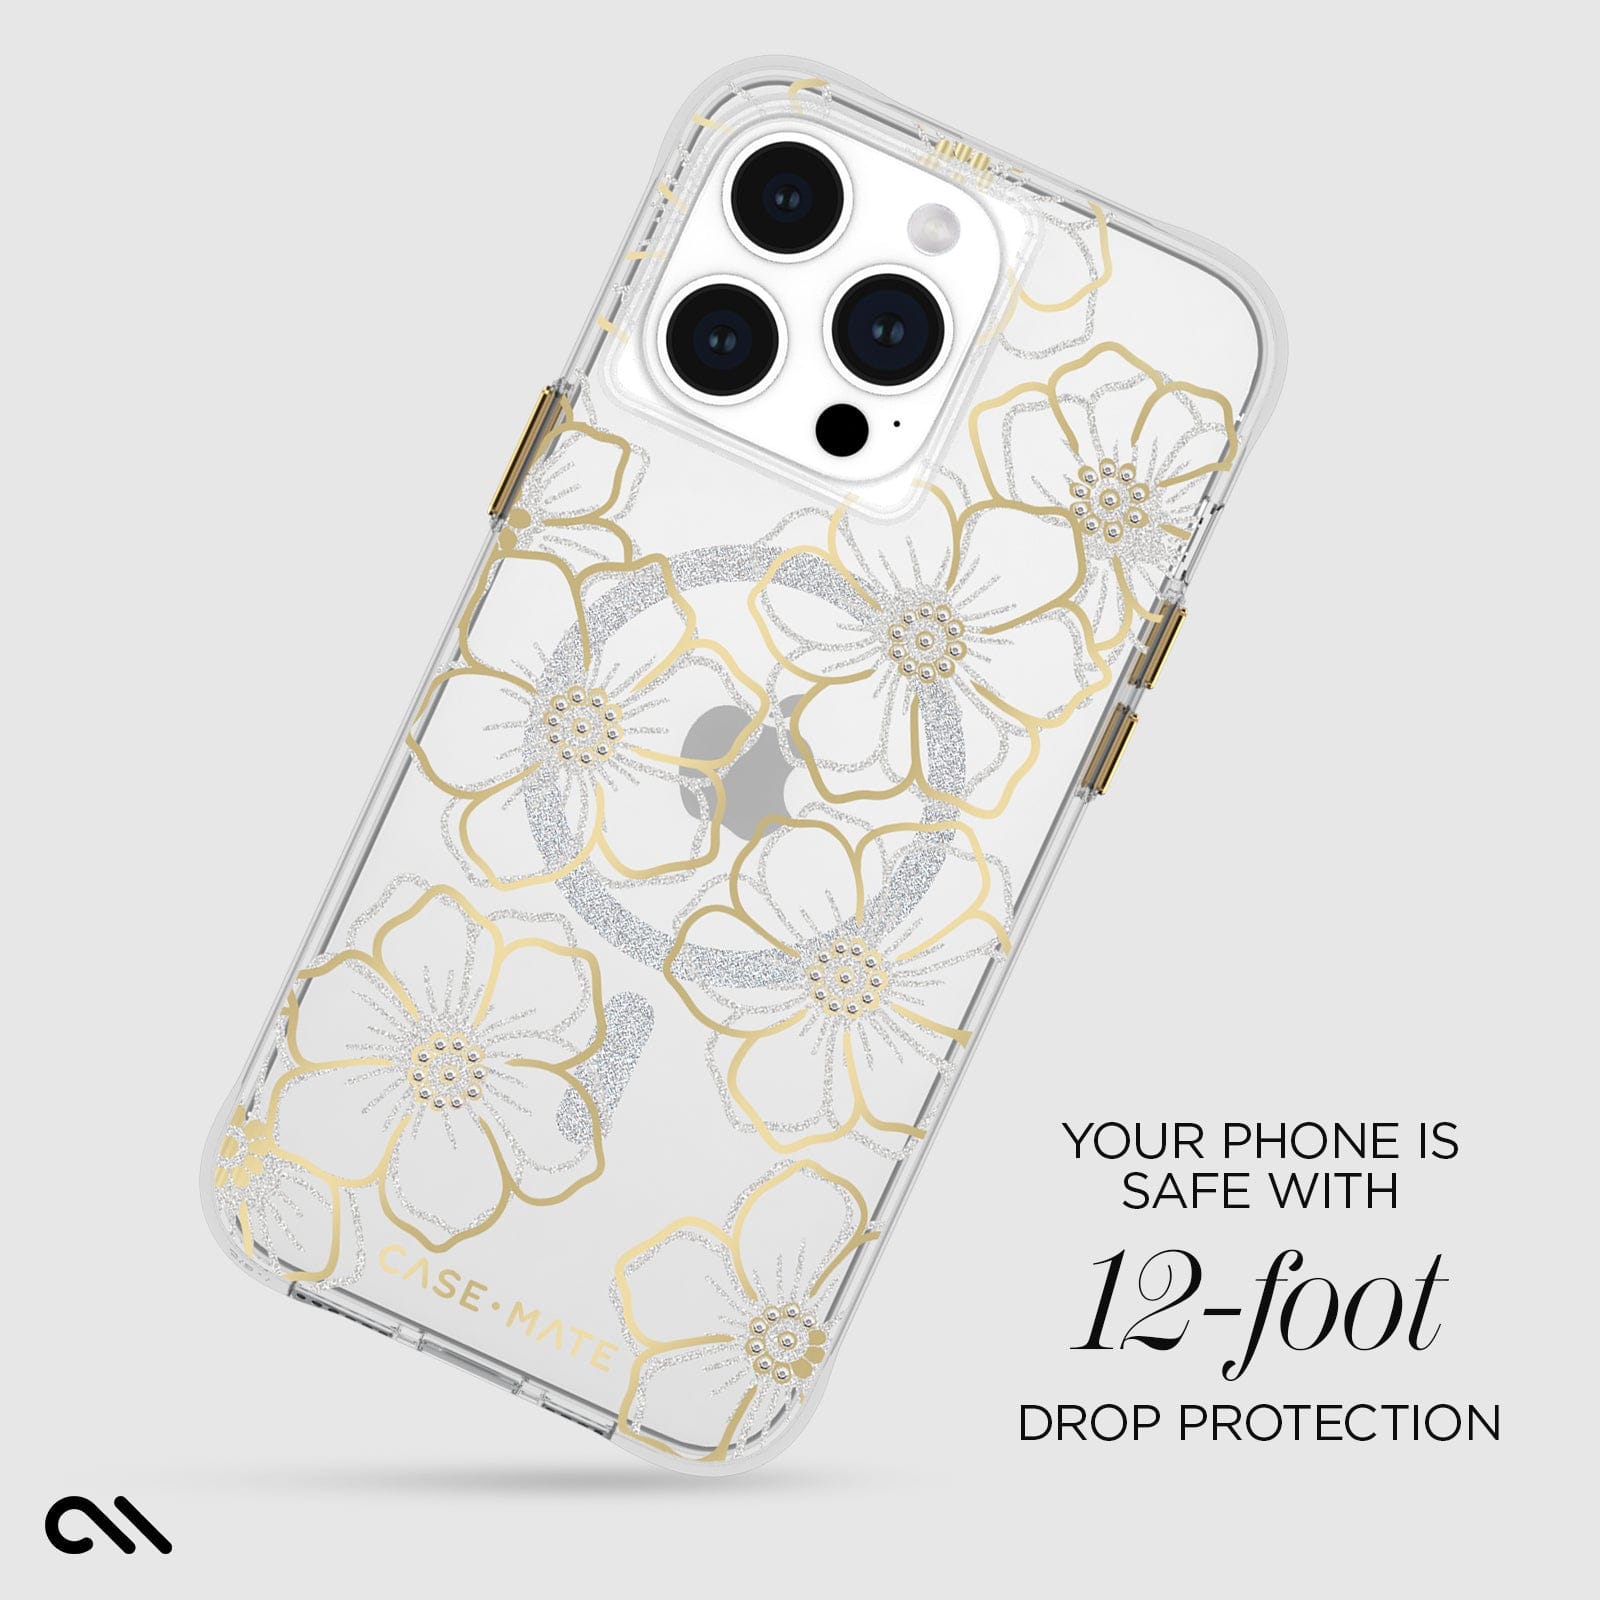 YOUR PHONE IS SAFE WITH 12 FOOT DROP PROTECTION